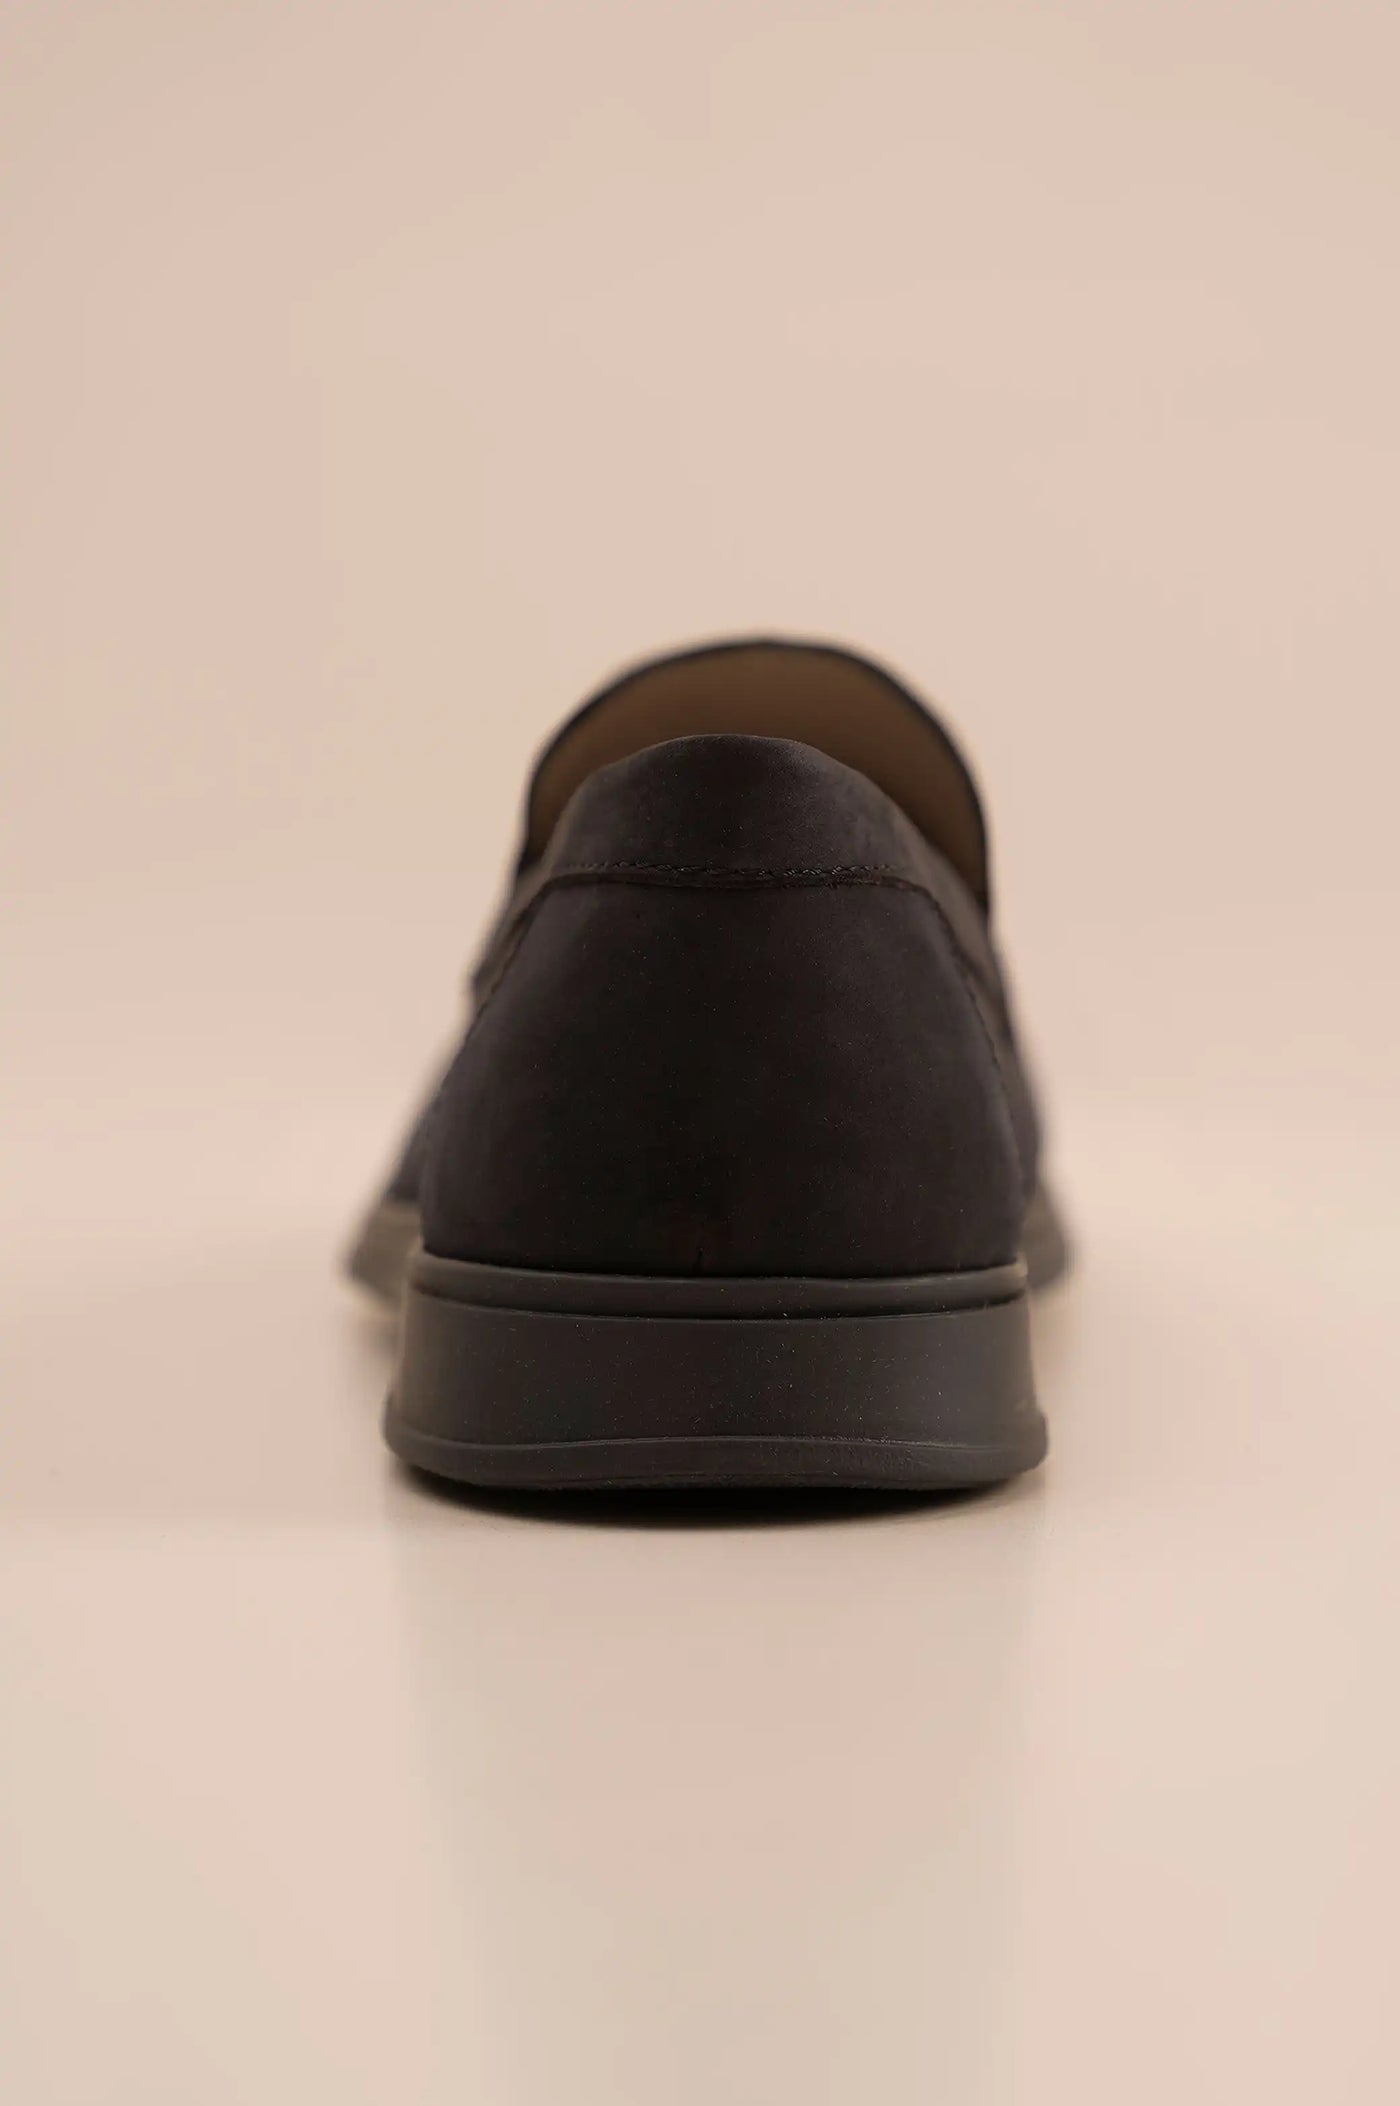 BRUNO CASUAL SLIP ONS - LOAFERS